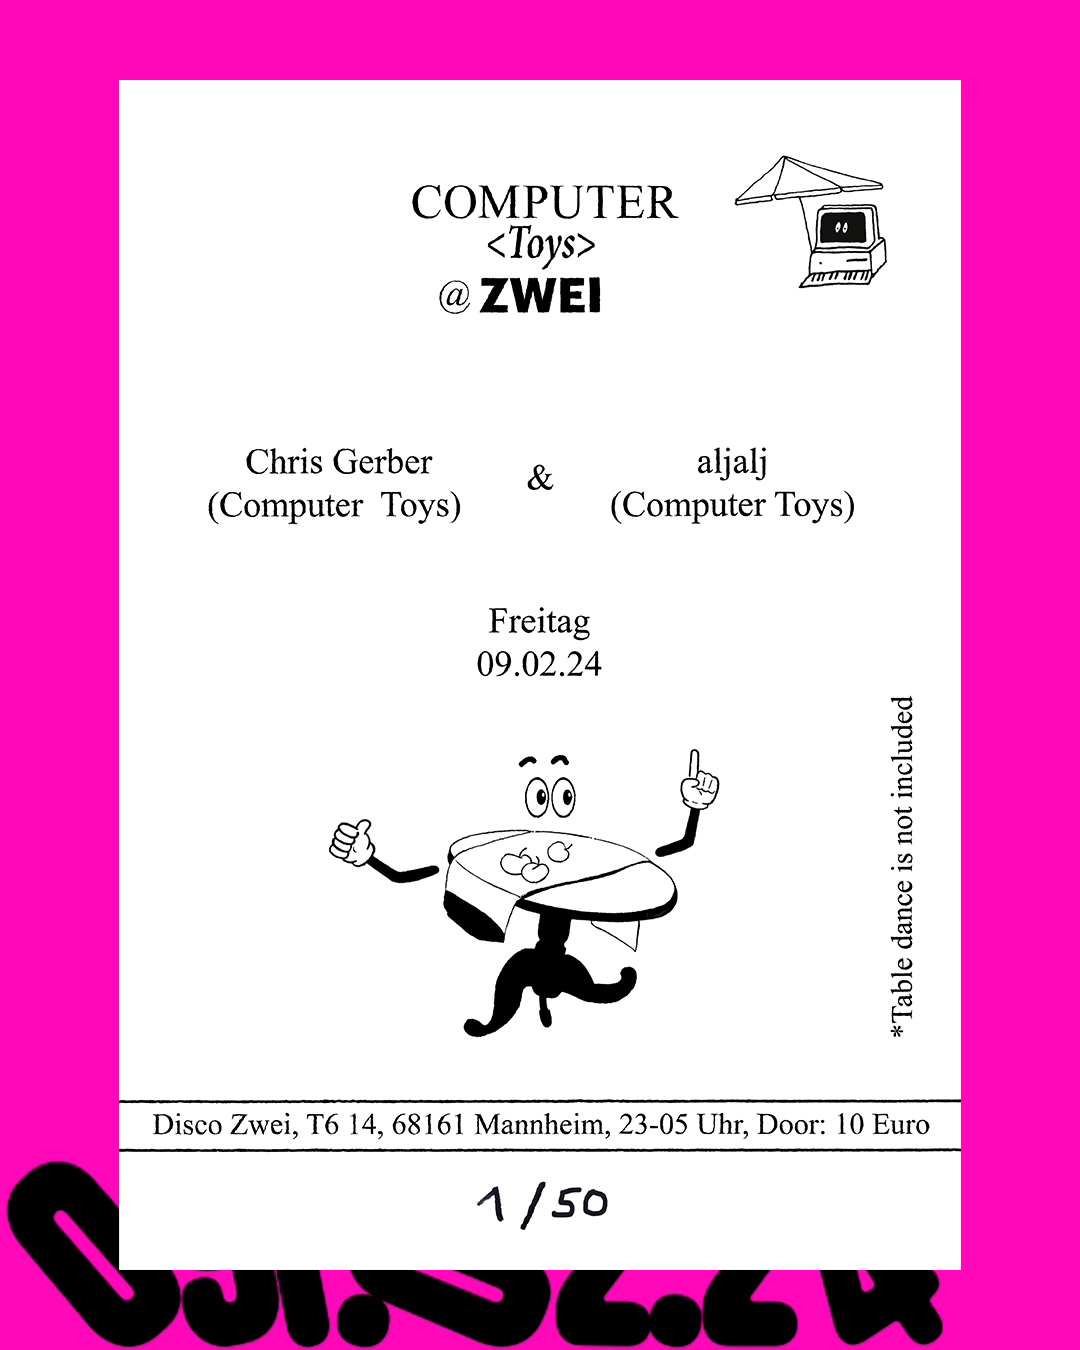 Event flyer of the Computer Toys party at Disco Zwei in Mannheim.